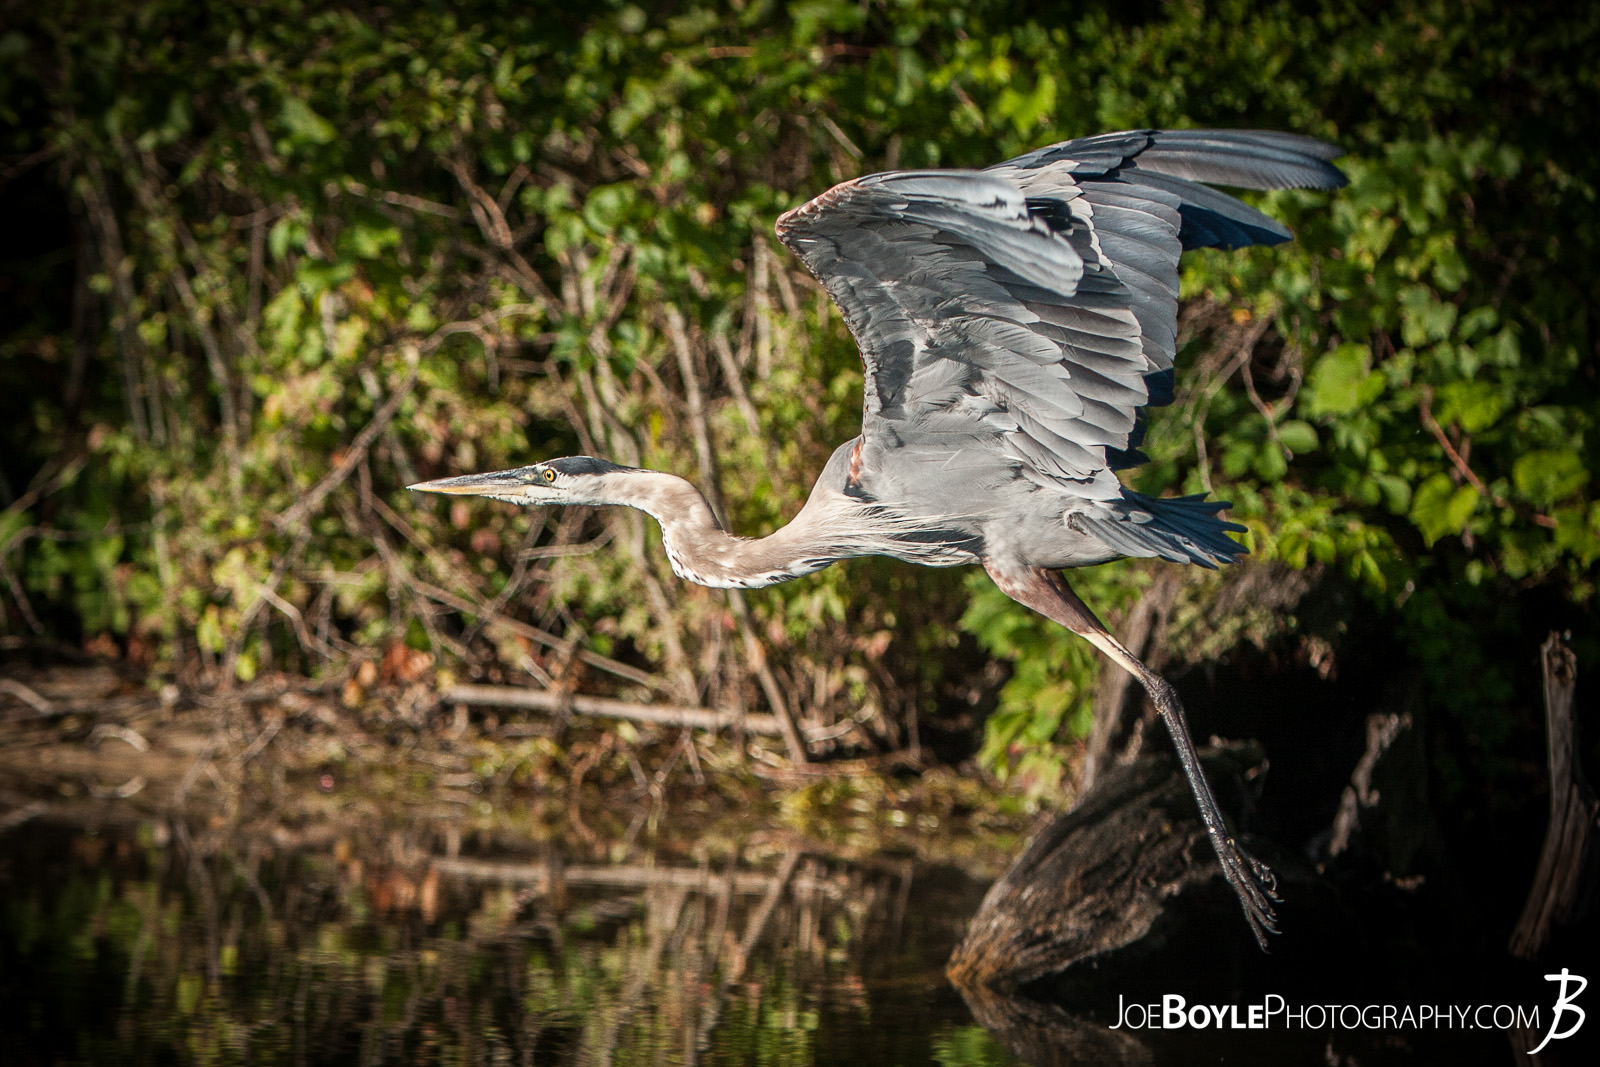  While on a trip up to Big Bass Lake, Michigan spending time with friends, fishing, having bonfires and what not, I was able to capture this Heron taking off and in flight! 